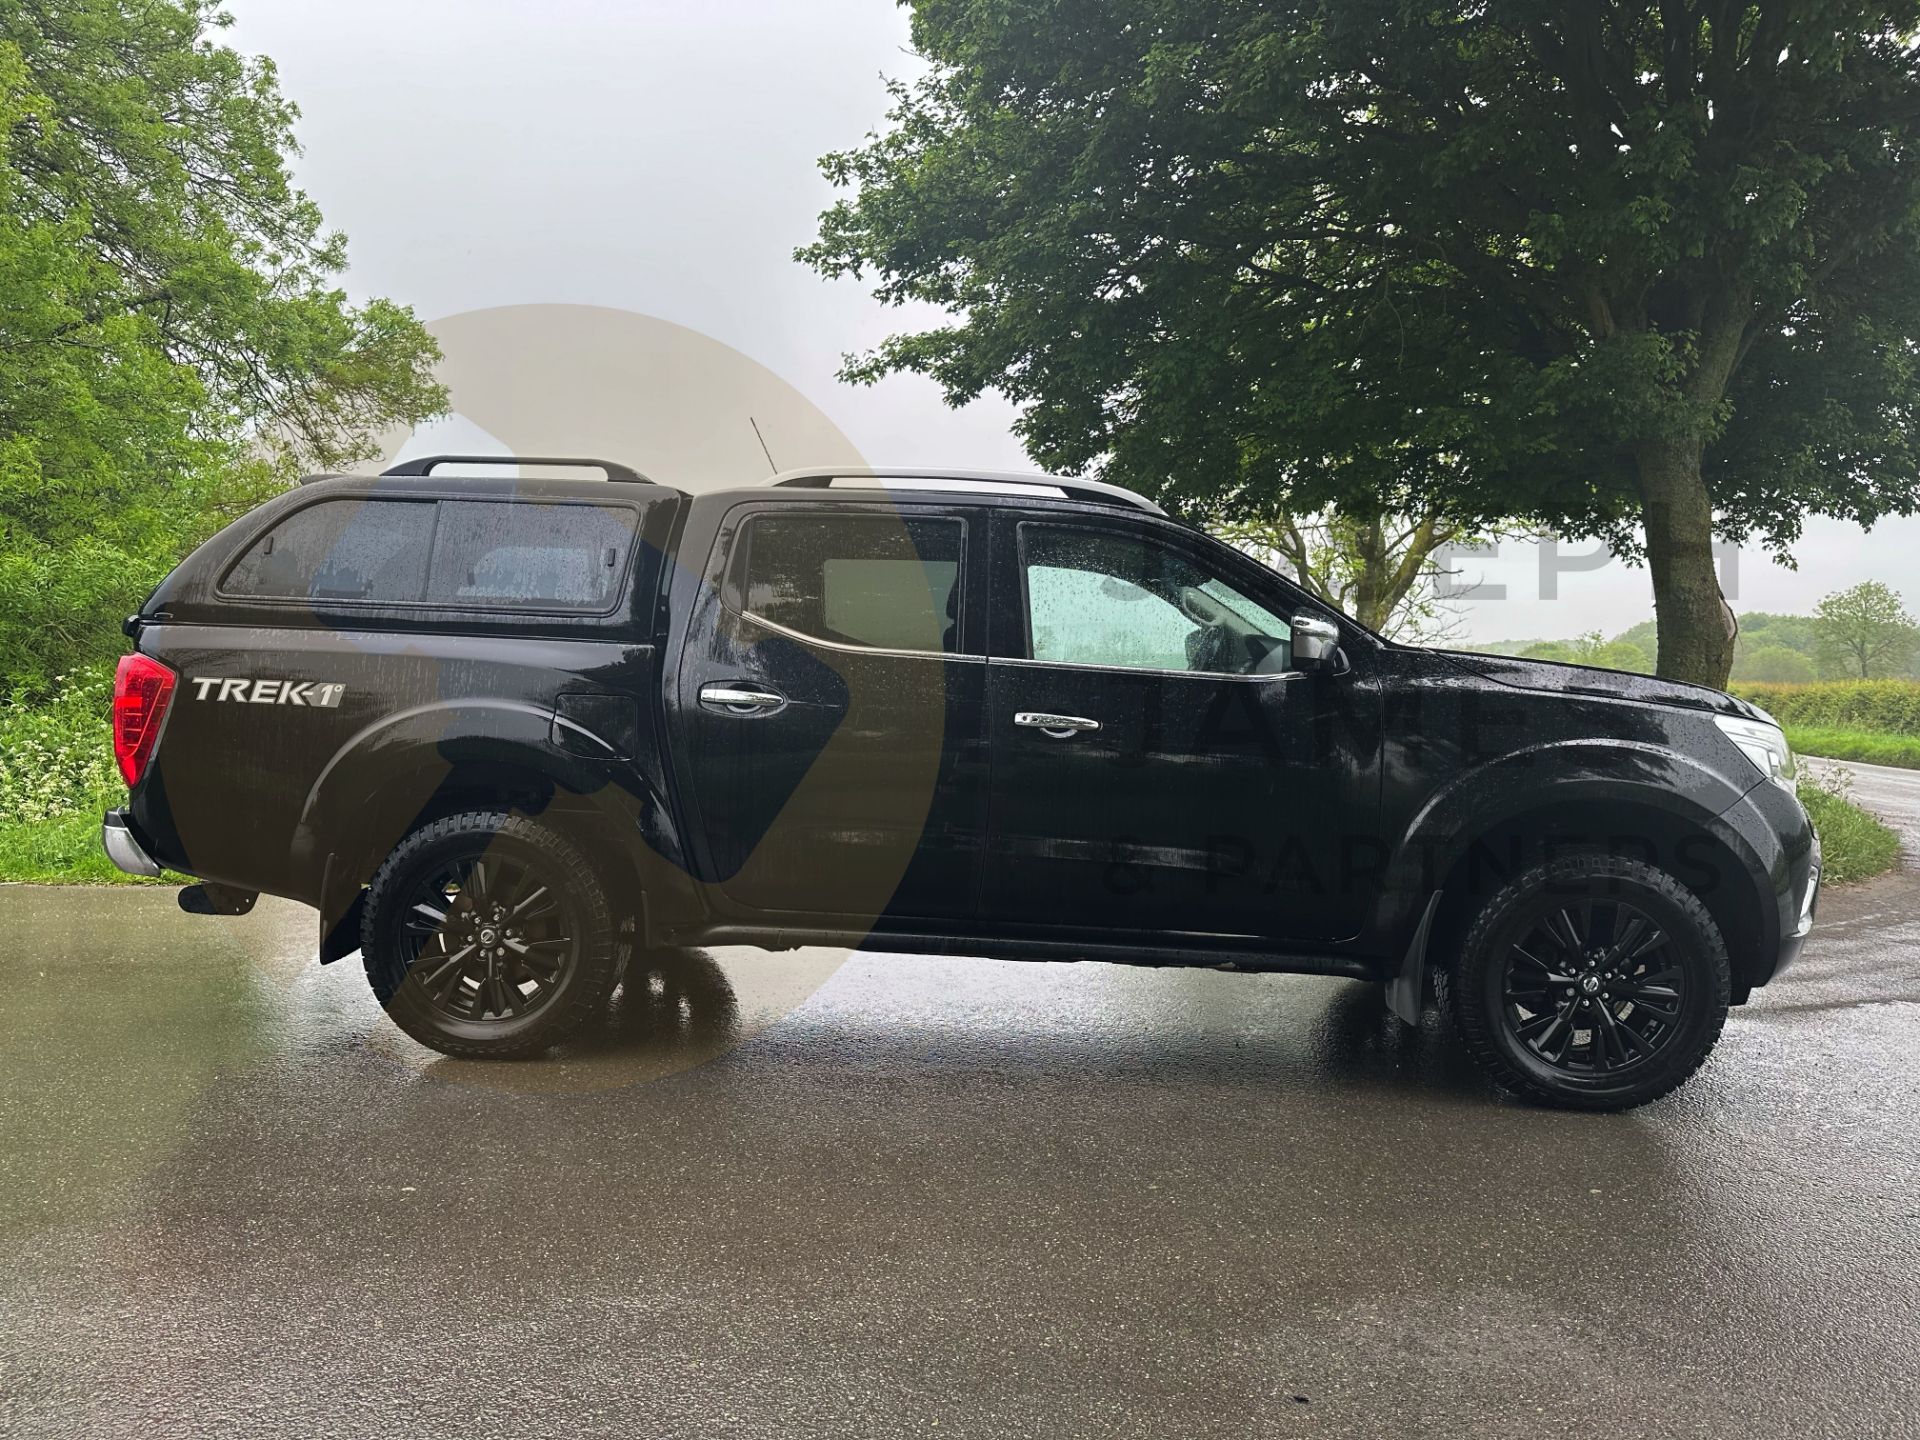 (ON SALE) NISSAN NAVARA *TREK-1 EDITION* DOUBLE CAB PICK-UP (2018 - EURO 6) 2.3 DCI - AUTOMATIC - Image 14 of 52